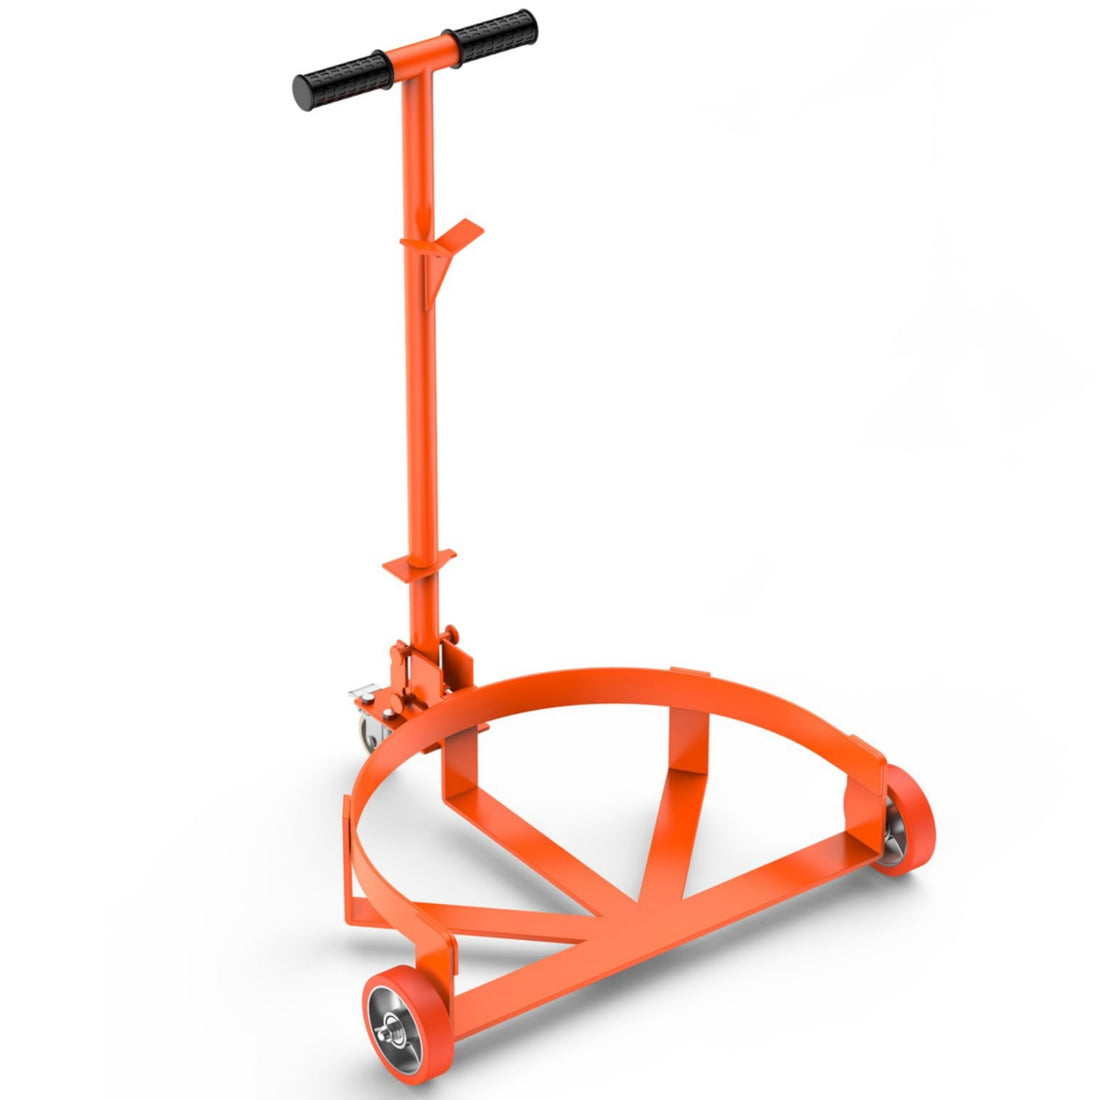 GARVEE 55 Gallon Drum Dolly, Heavy Duty Barrel Dolly with 3 Poly-on-Steel Brake Wheels, 1000lbs Capacity Trash Can Dolly with Handle, Steel Frame Dolly Orange